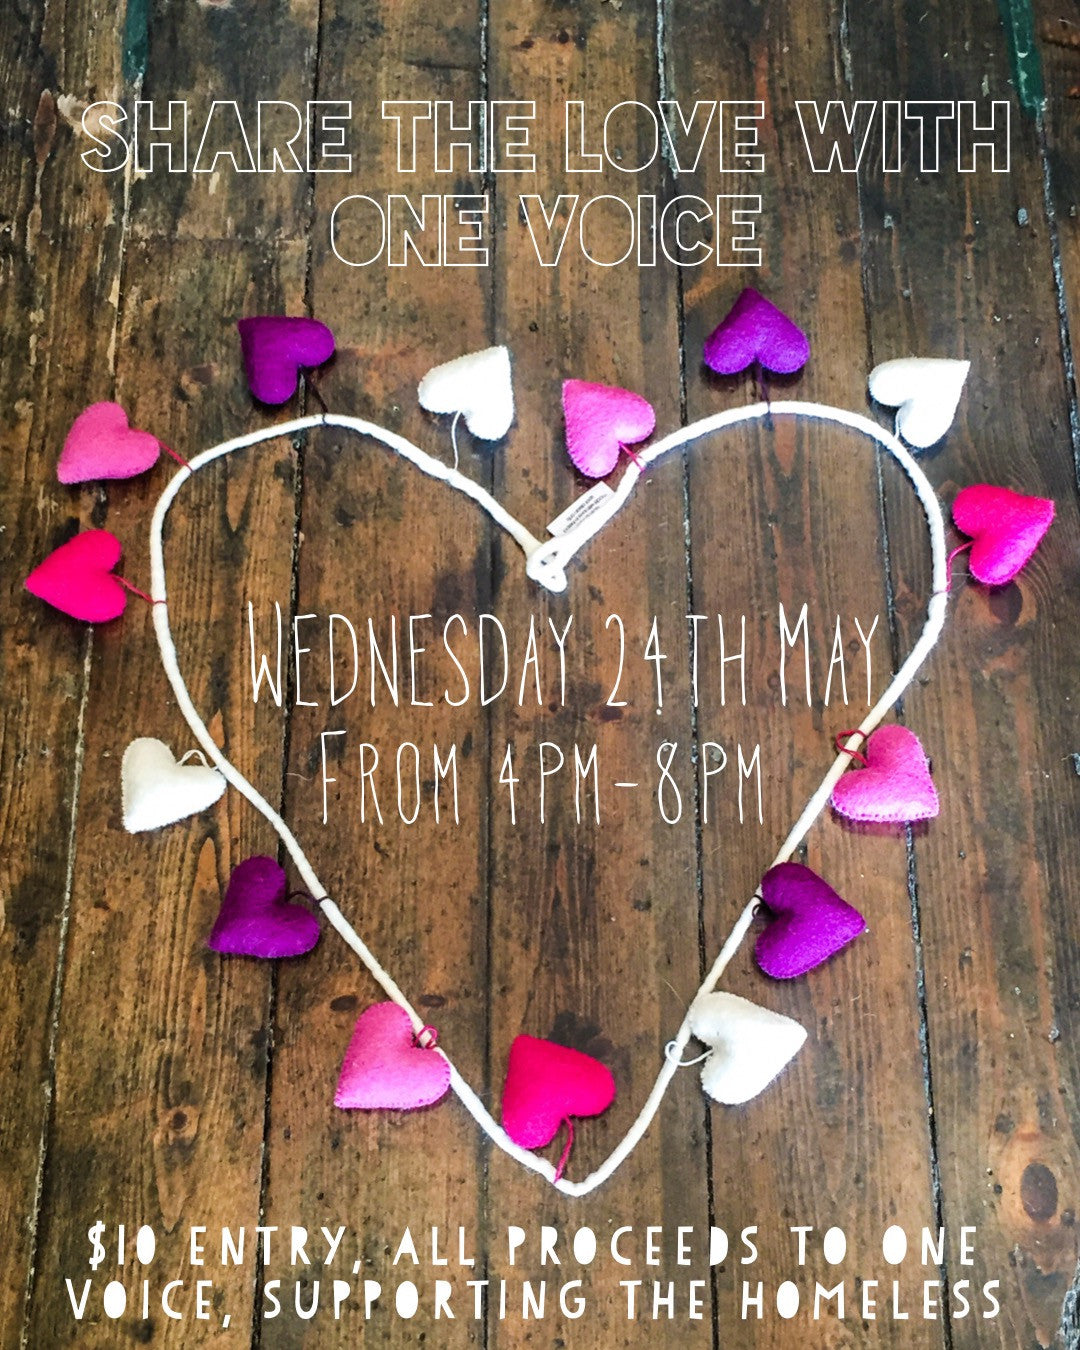 One Voice Fundraiser 24th May 2017 (4-8pm)